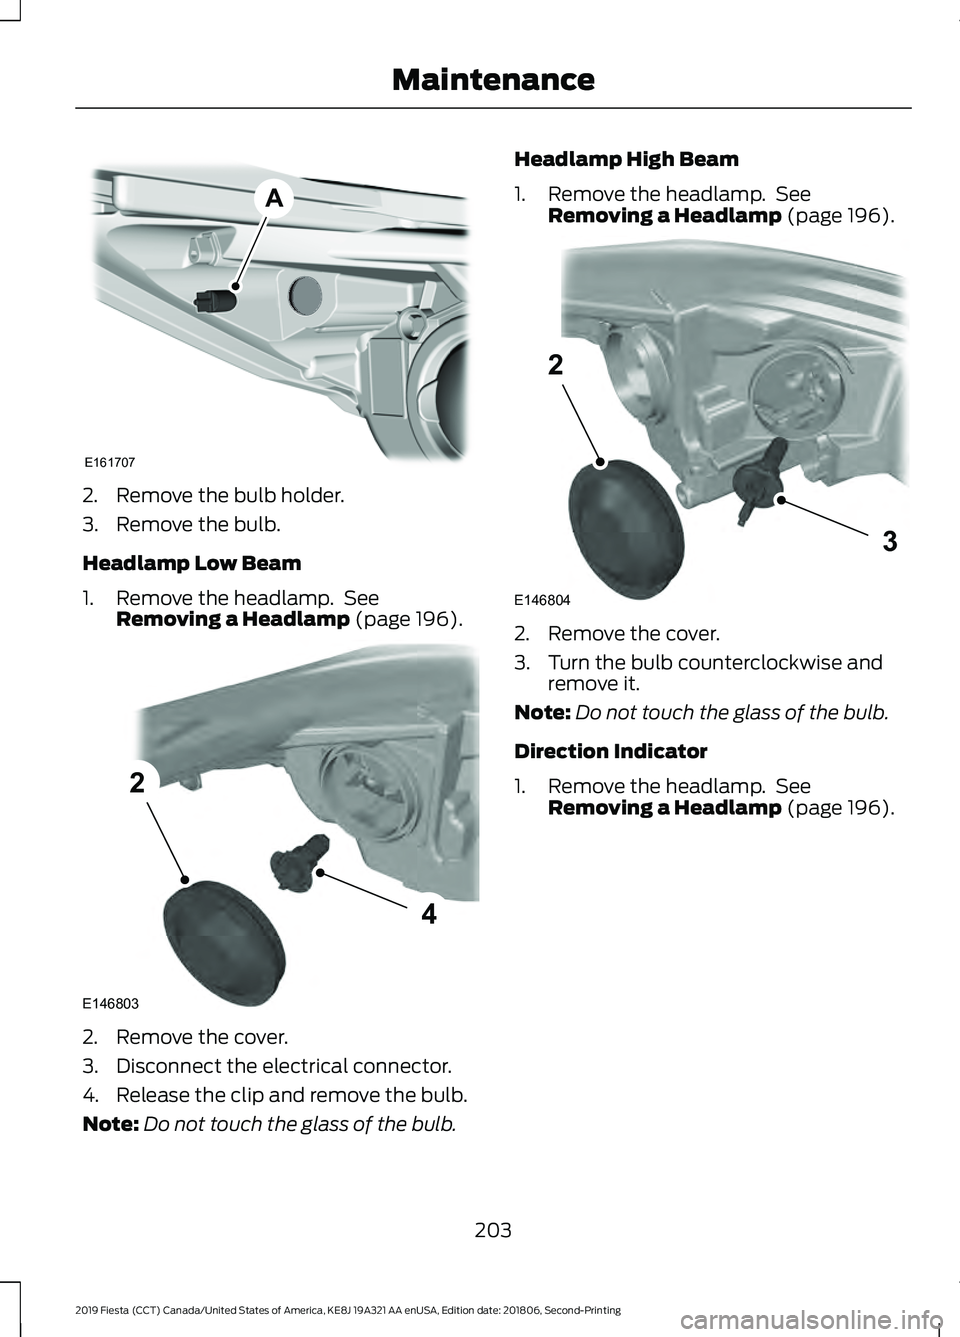 FORD FIESTA 2019  Owners Manual 2. Remove the bulb holder.
3. Remove the bulb.
Headlamp Low Beam
1. Remove the headlamp.  See
Removing a Headlamp (page 196). 2. Remove the cover.
3. Disconnect the electrical connector.
4. Release th